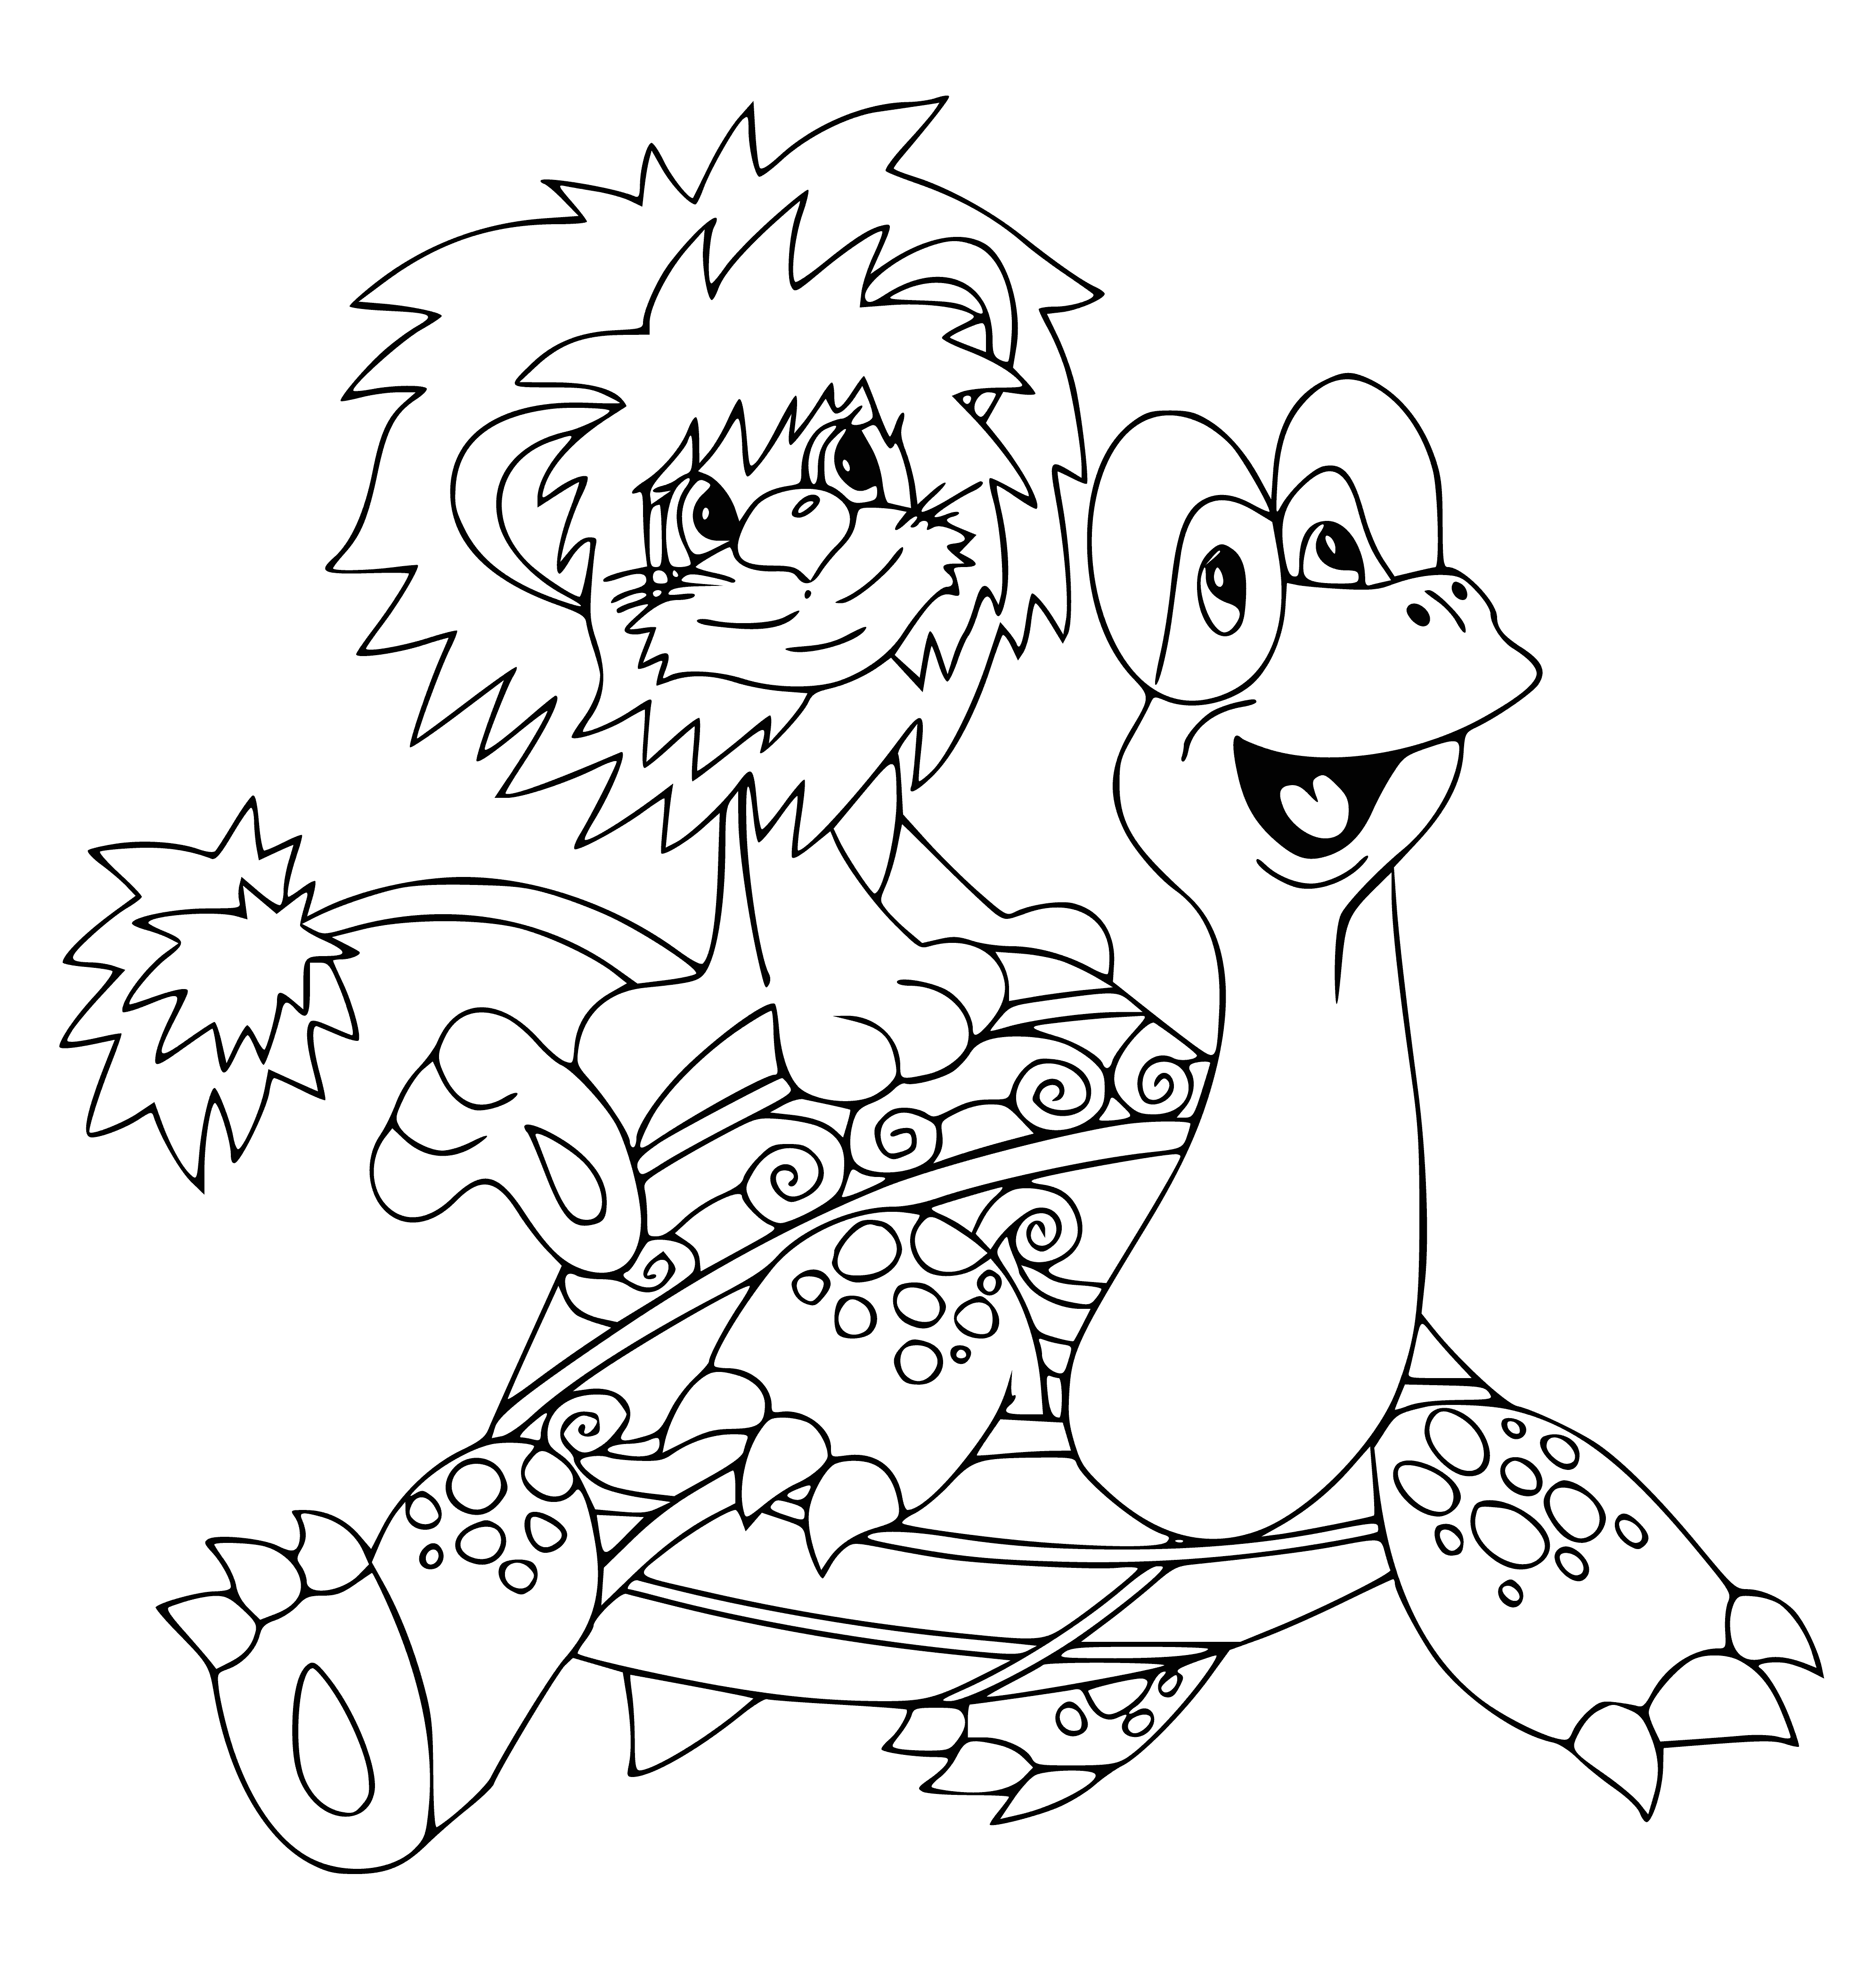 coloring page: Lion and Turtle are happy in the sun, singing and swimming with smiles on their faces.